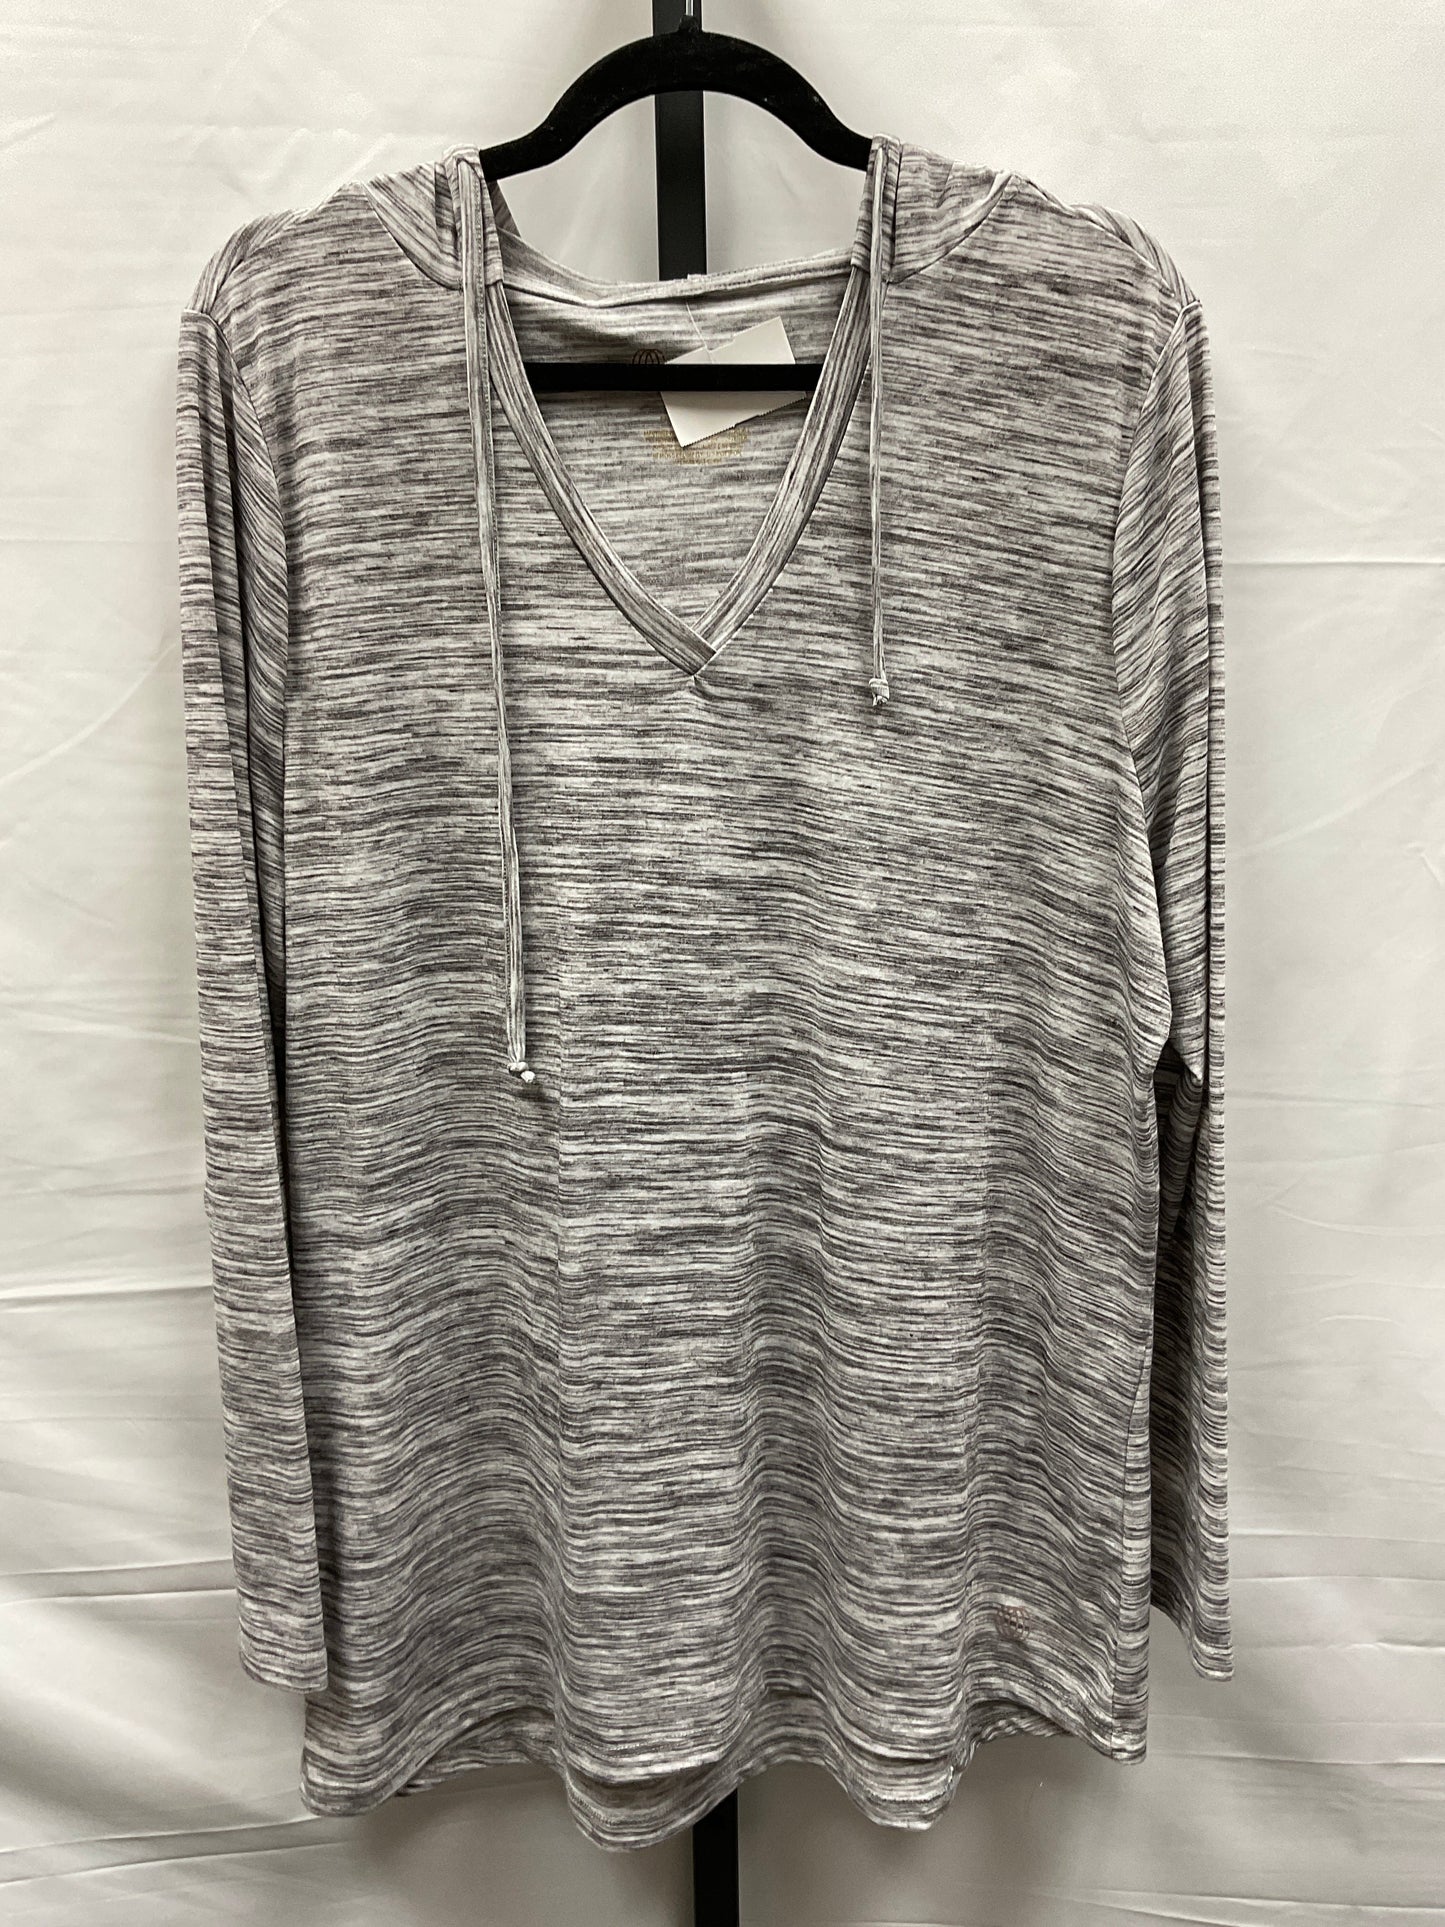 Grey & White Top Long Sleeve Balance Collection, Size 1x